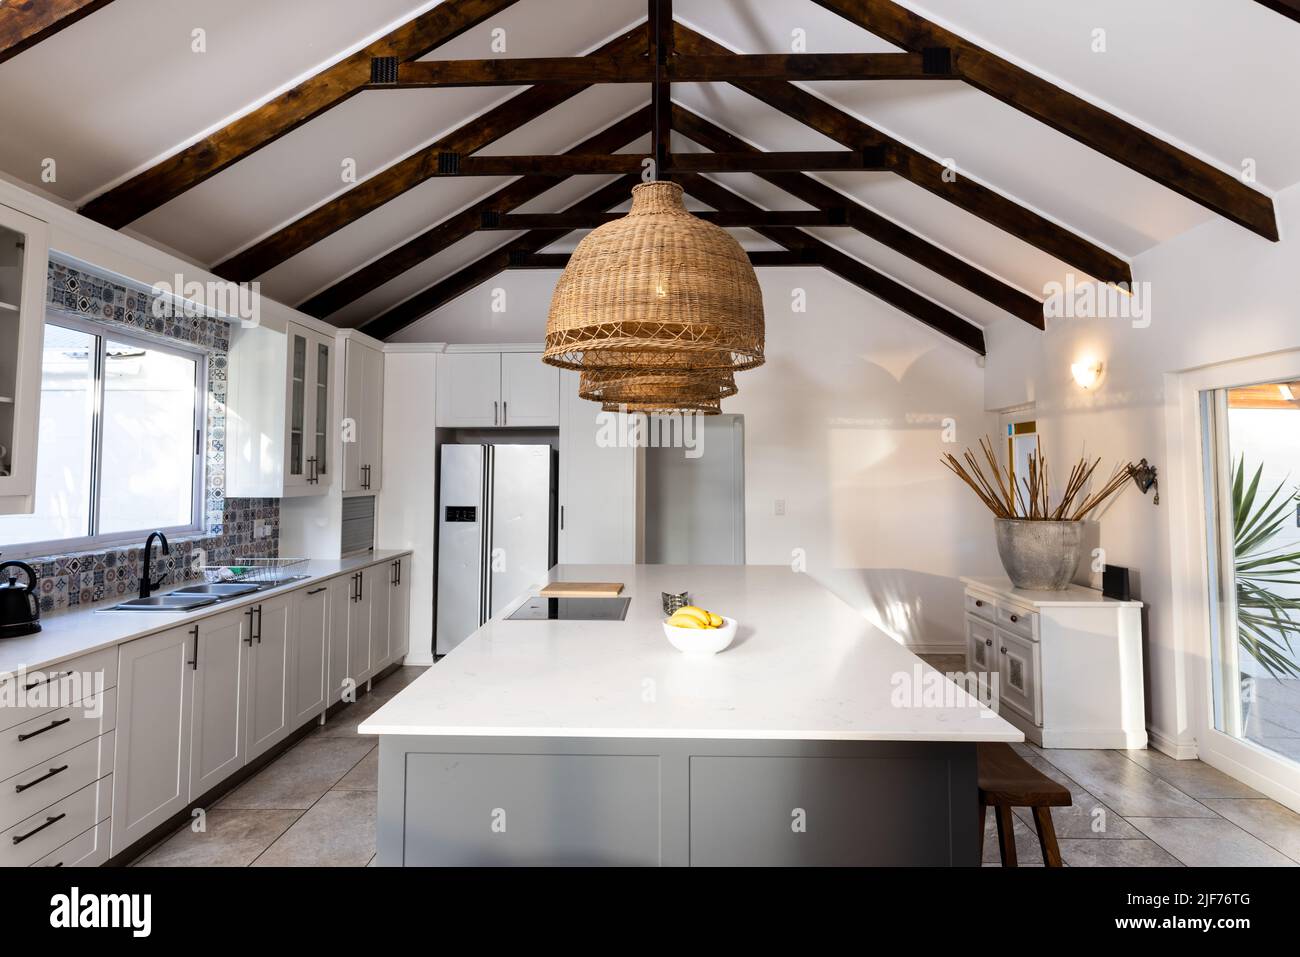 Lighting equipment hanging in a row from mansard roof over kitchen island in modern kitchen Stock Photo